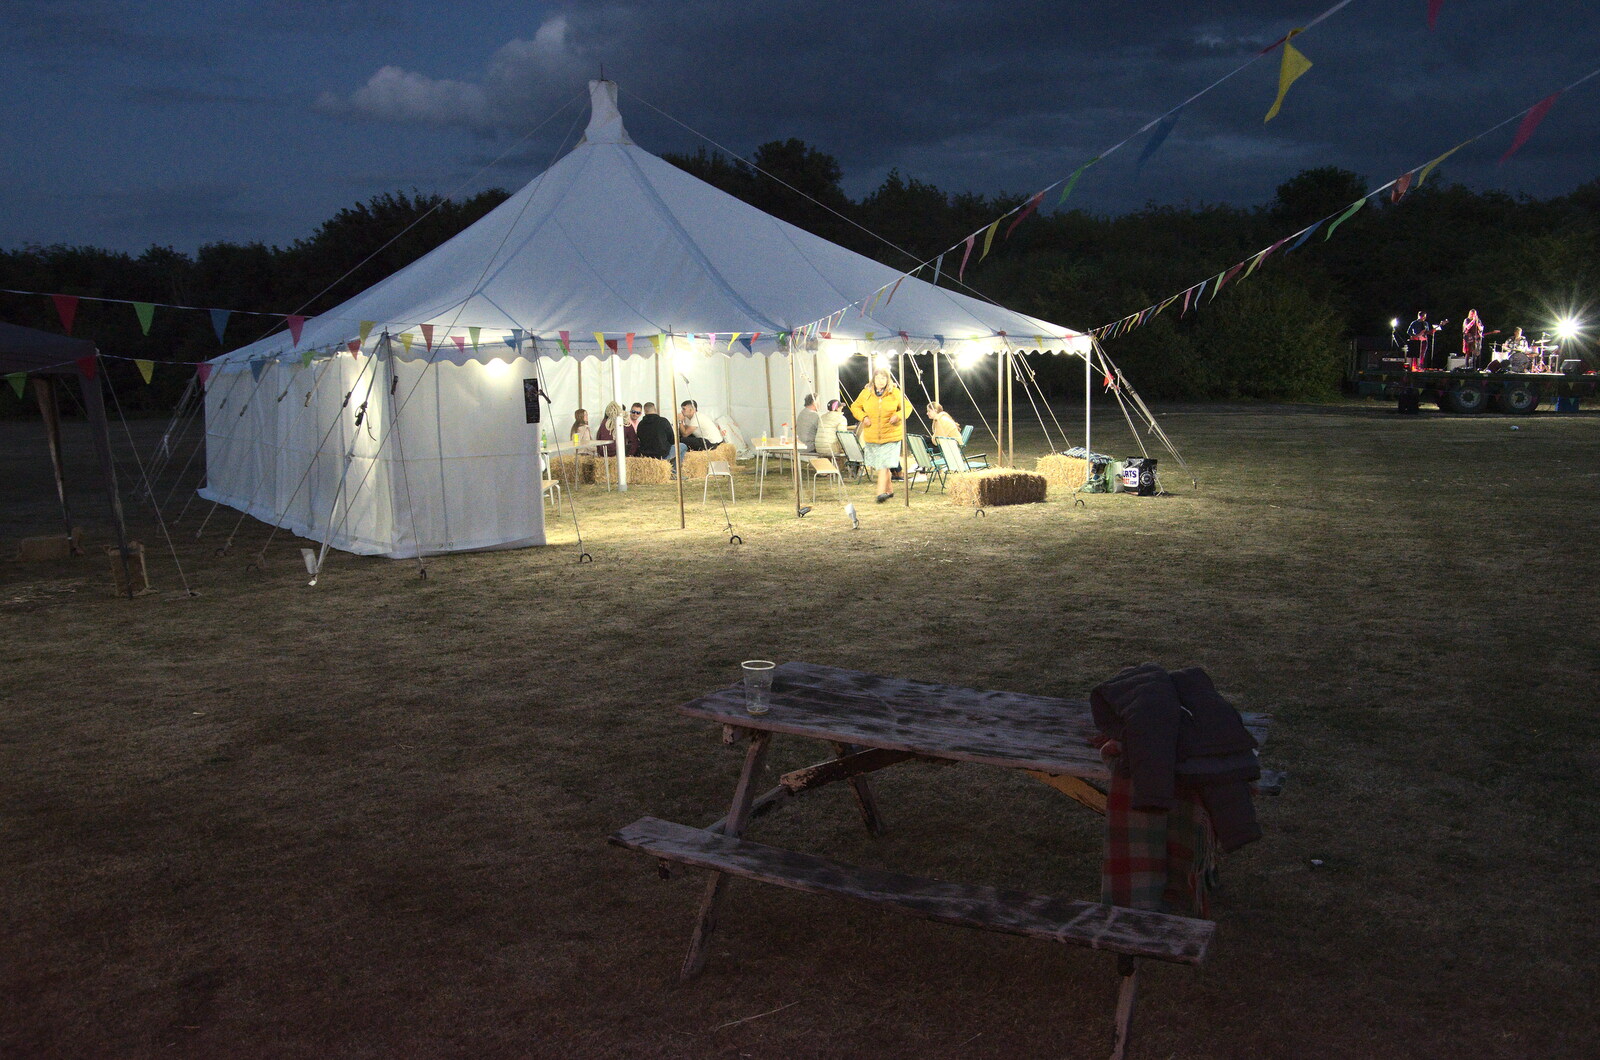 Little Red Kings at Fly High Festival, Seething Airfield, Norfolk - 5th August 2022: A marquee is an oasis of light in the field